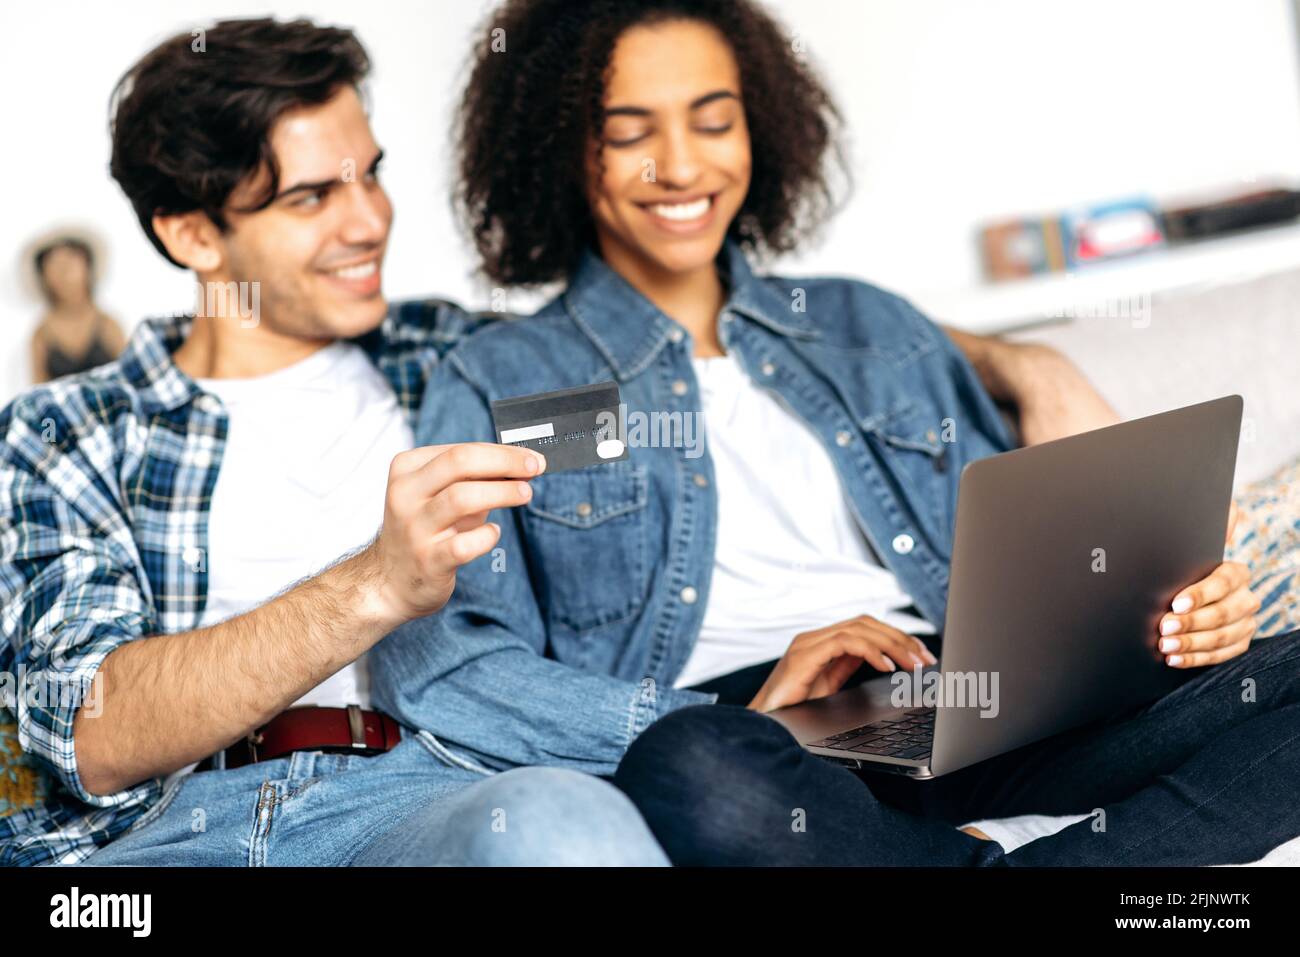 Joyful young mixed race family couple, guy with girl sitting on sofa in living room, dressed in casual stylish clothes, shopping online using laptop and credit card, paying for goods, smiling Stock Photo